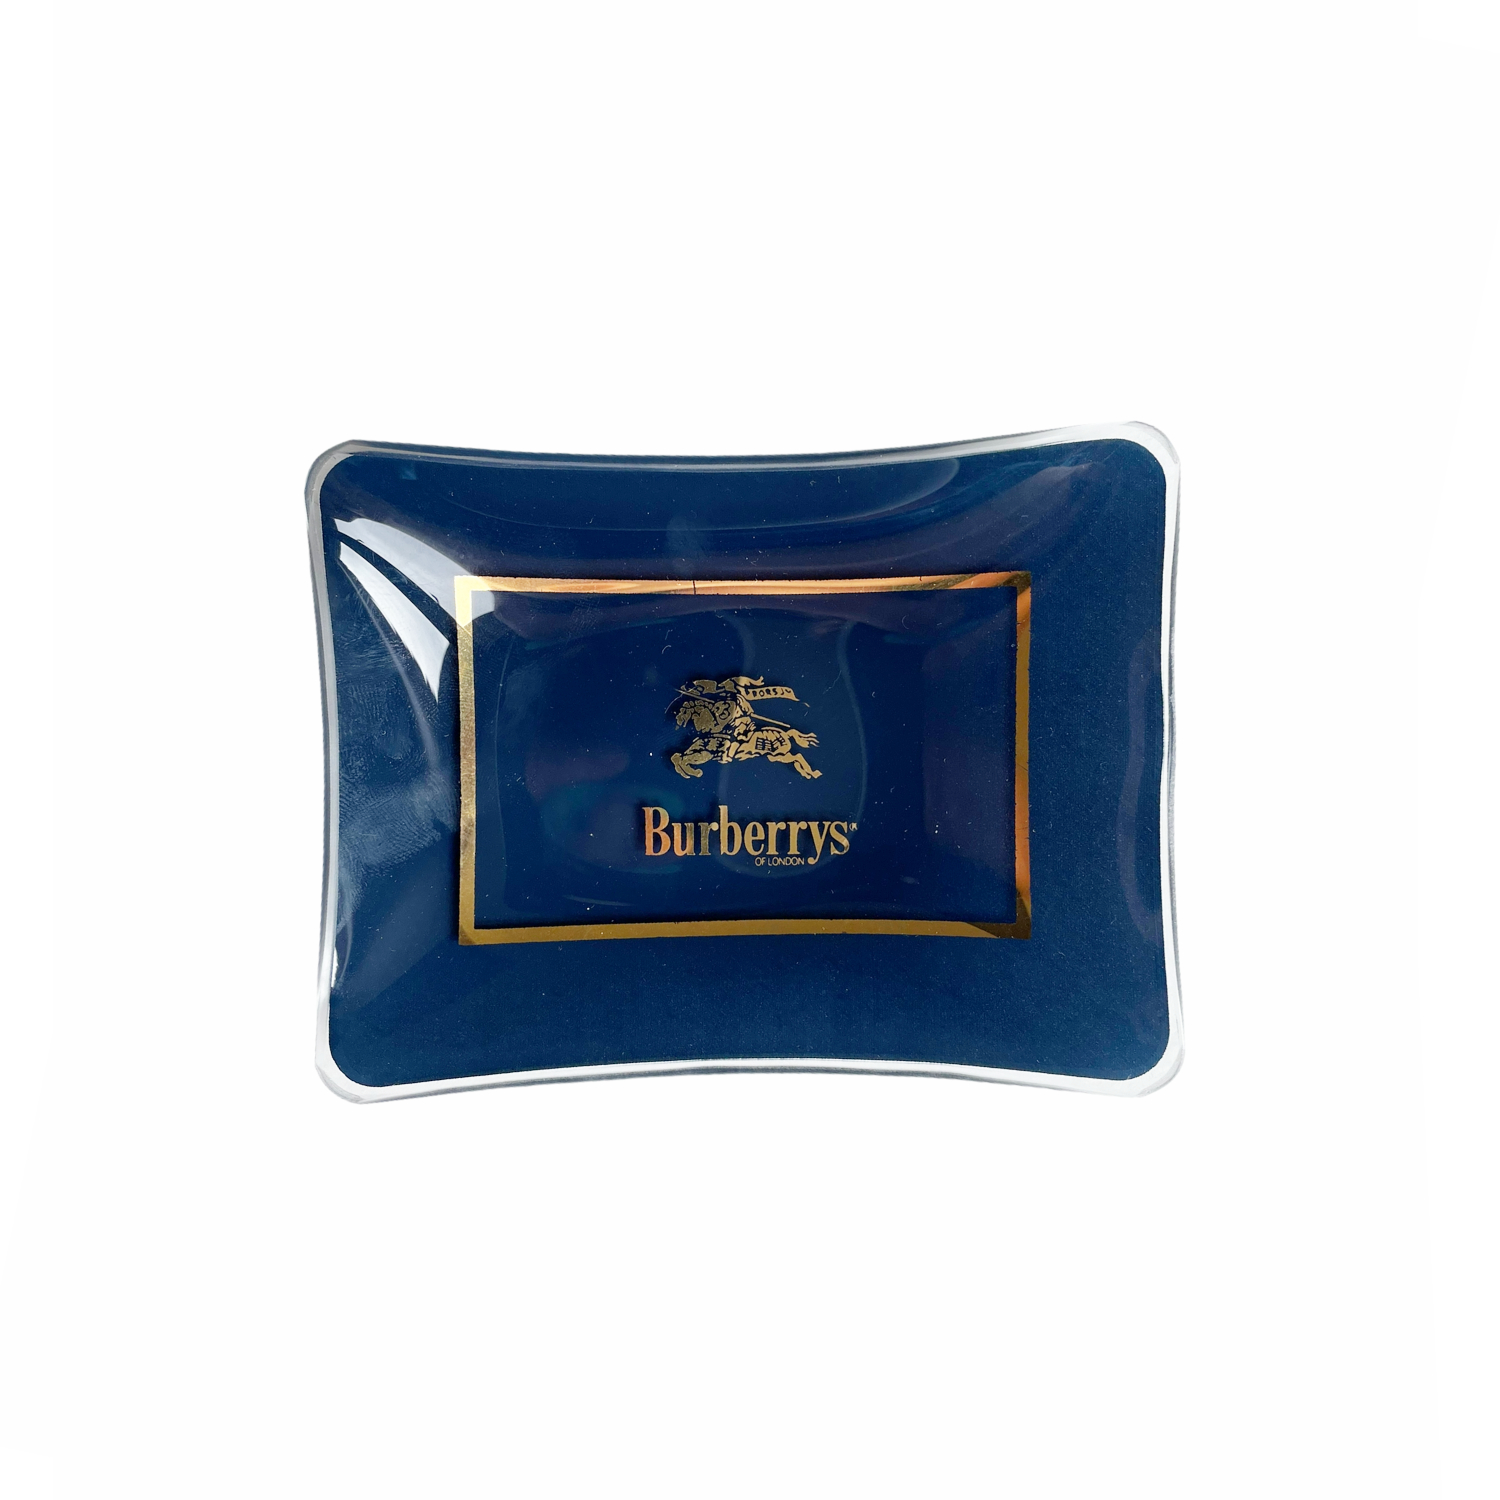 Vintage Burberry Glass Ashtray in Navy and Gold | NITRYL